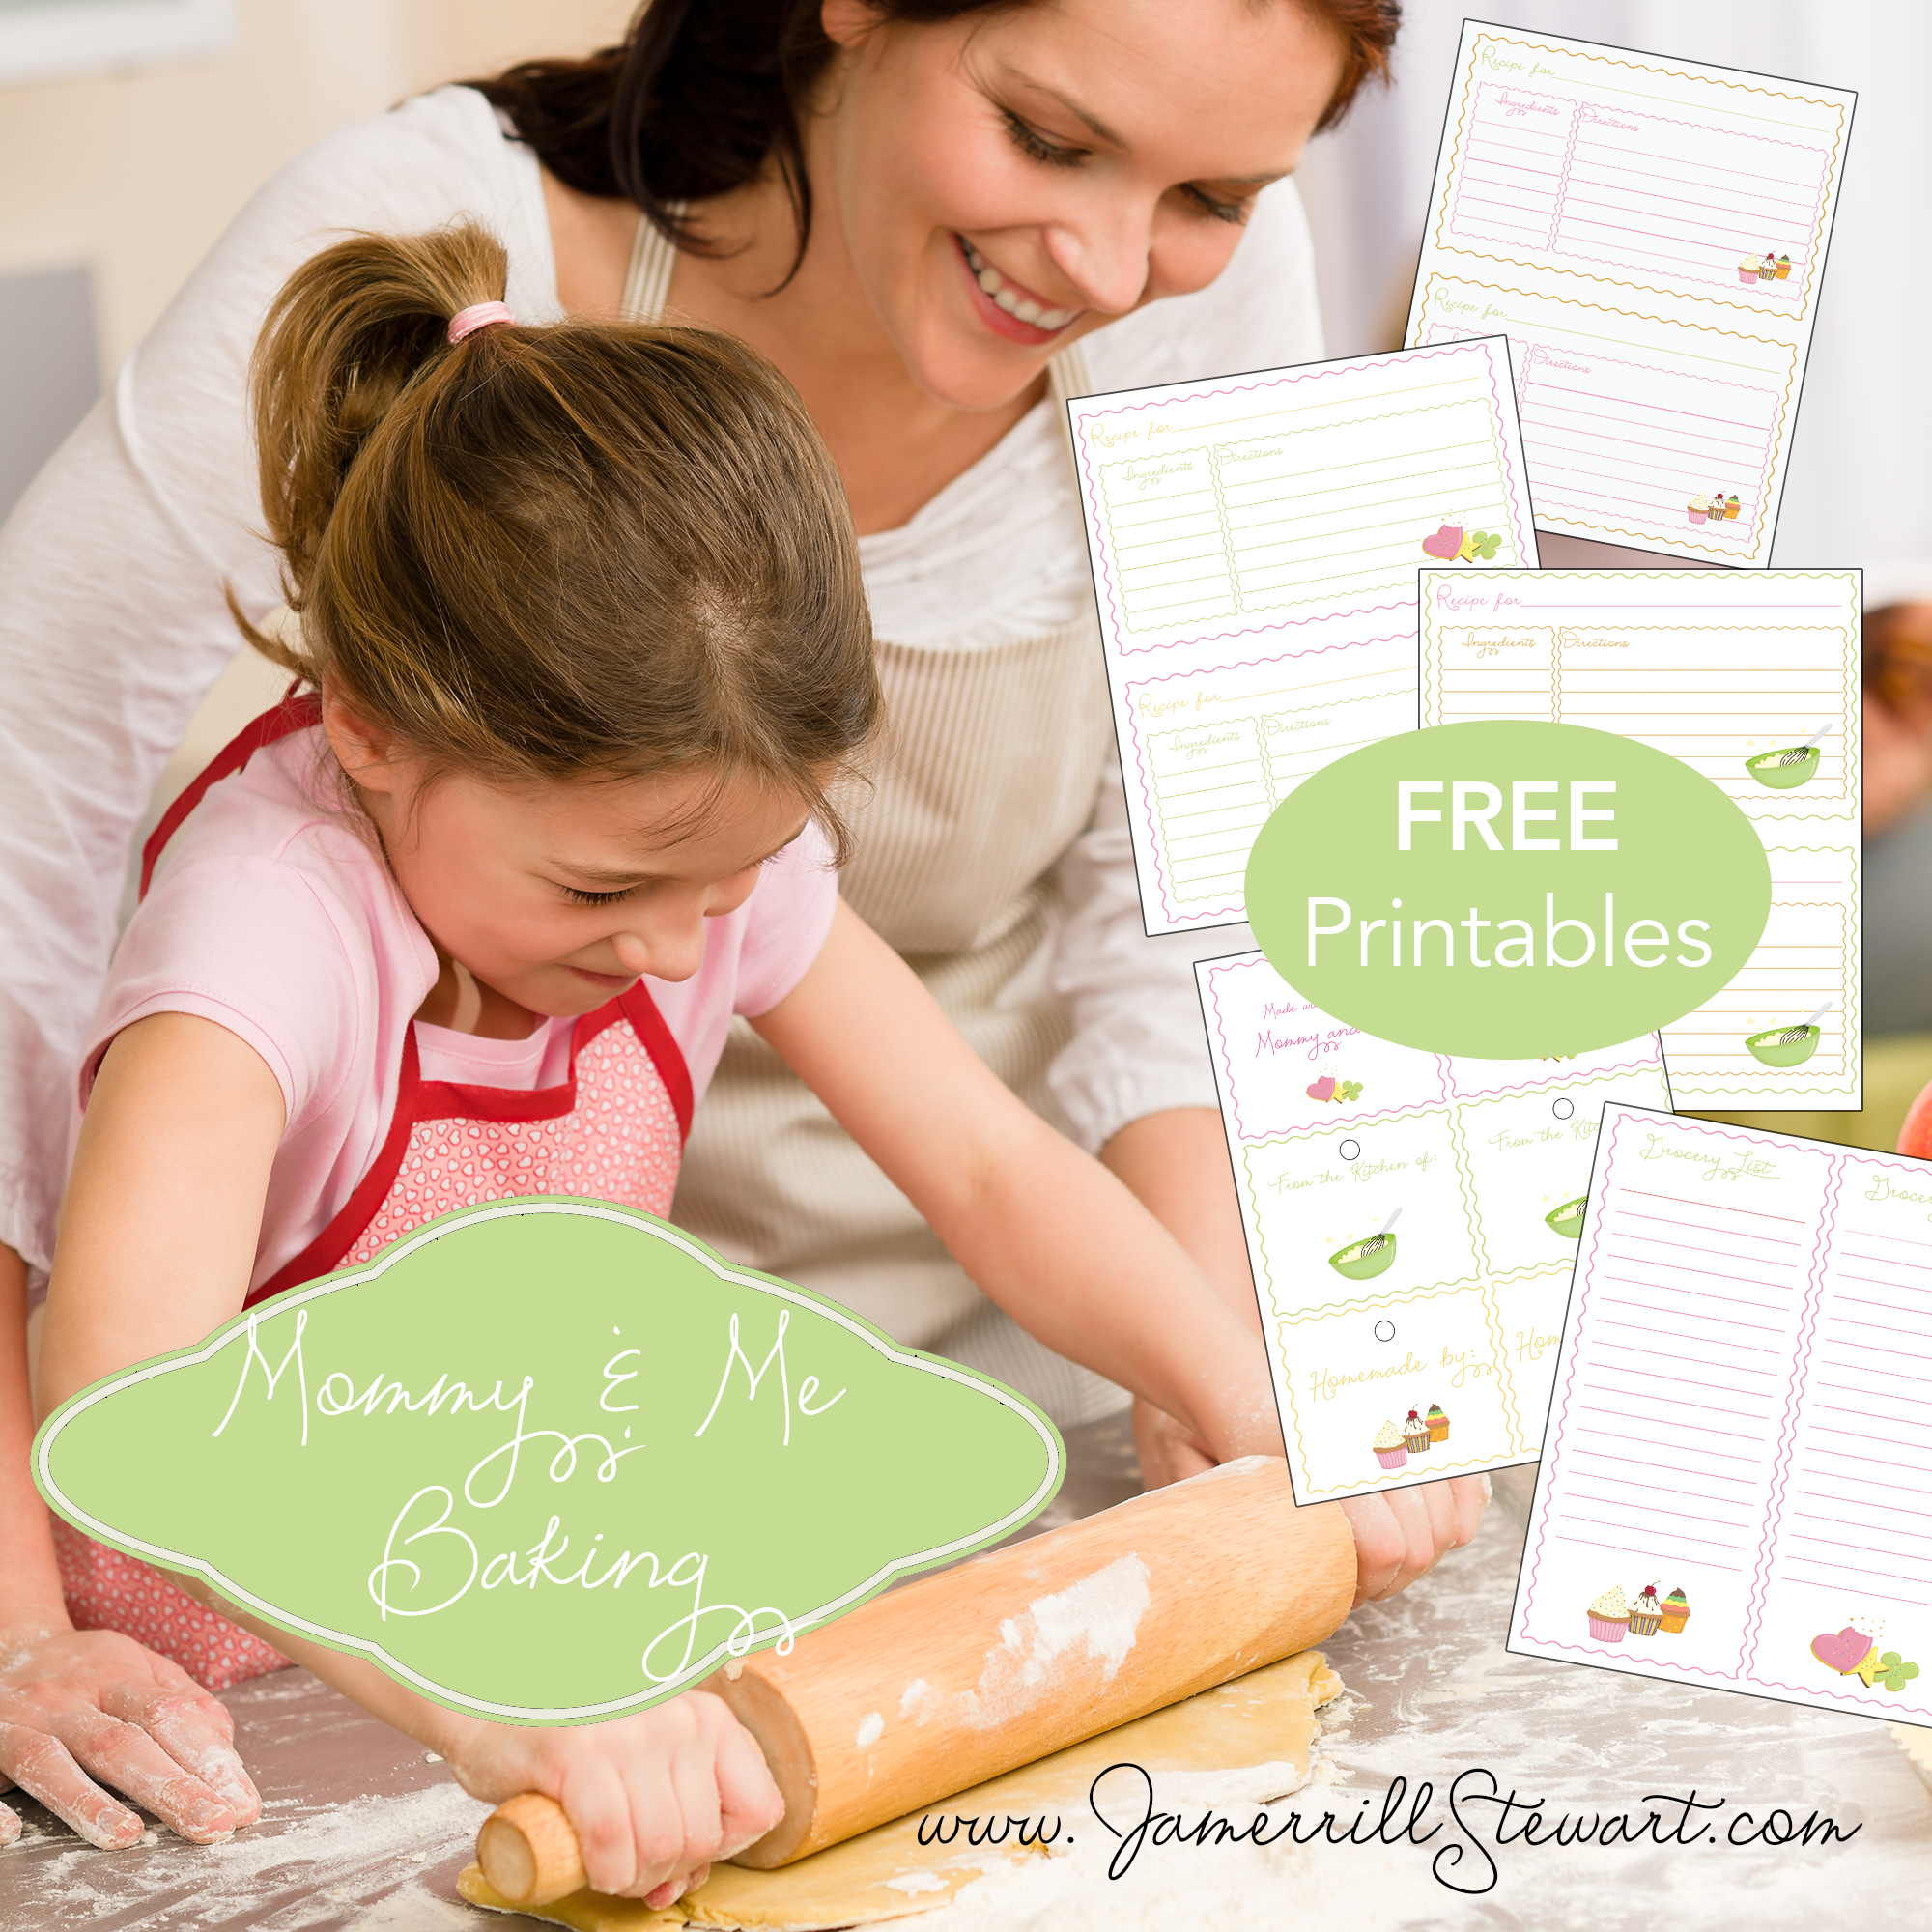 FREE "Mommy and Me" Baking Printables!